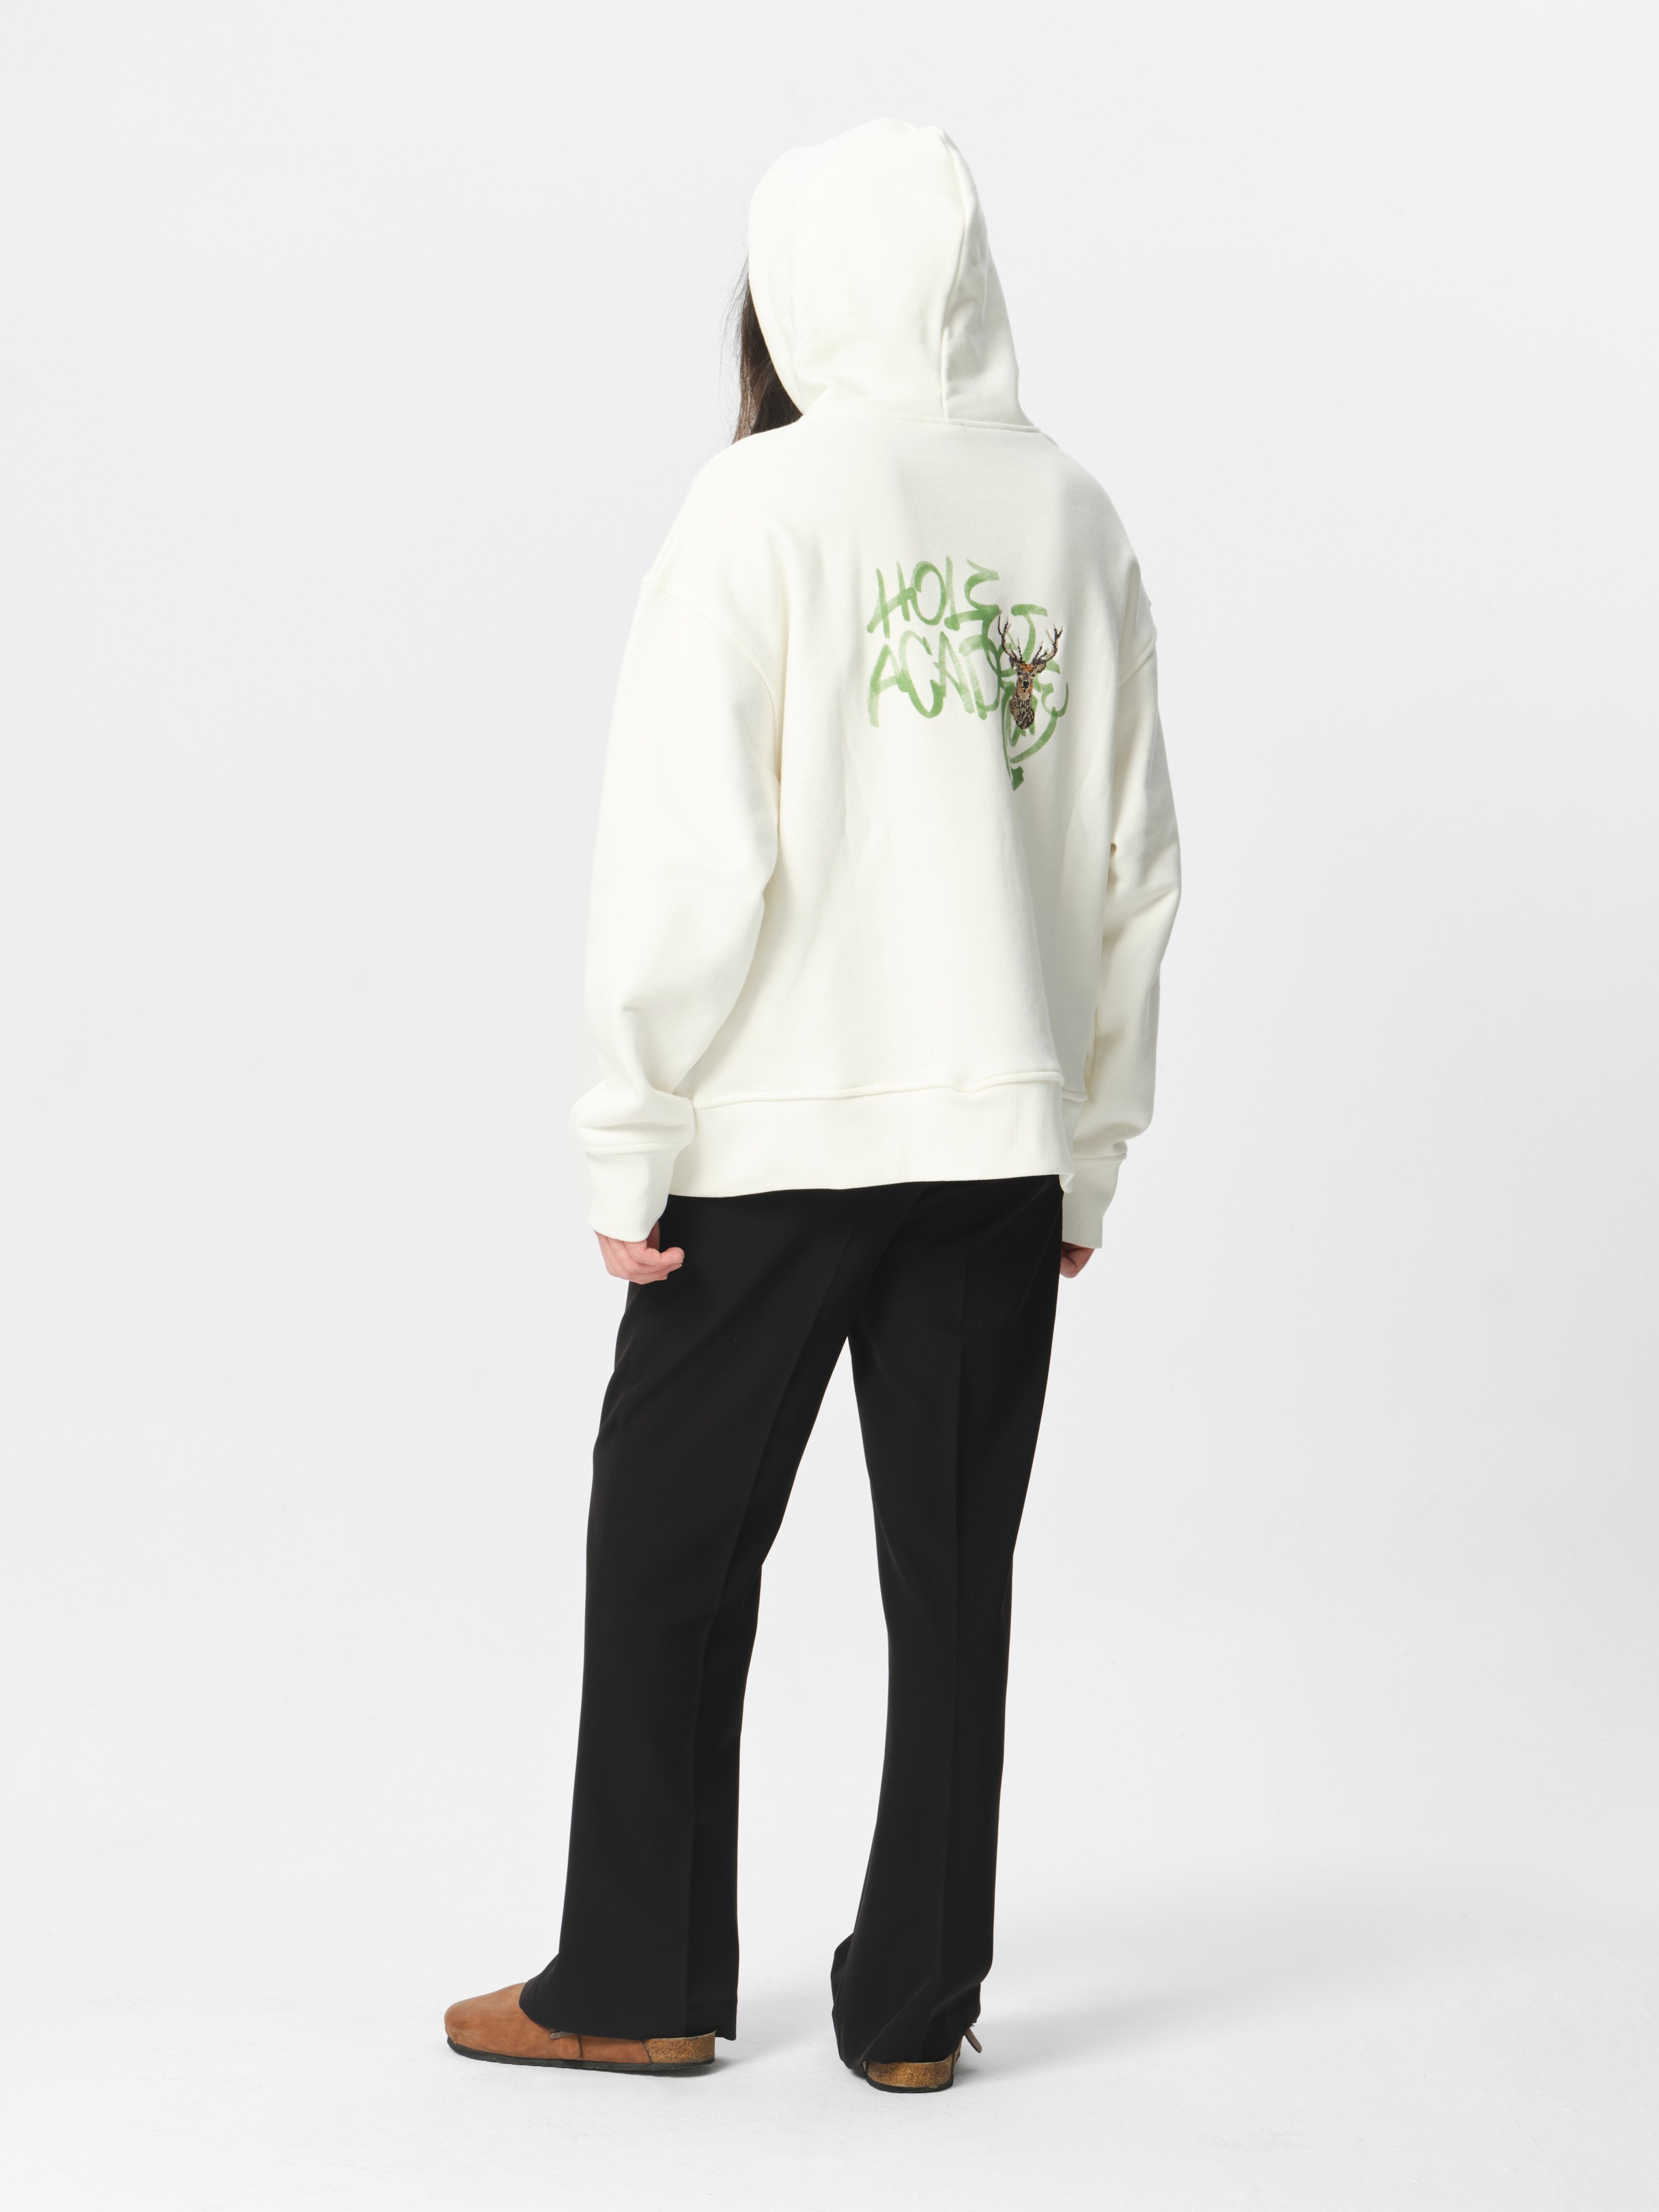 The Meister X Hole Academie Oversize Hoodie